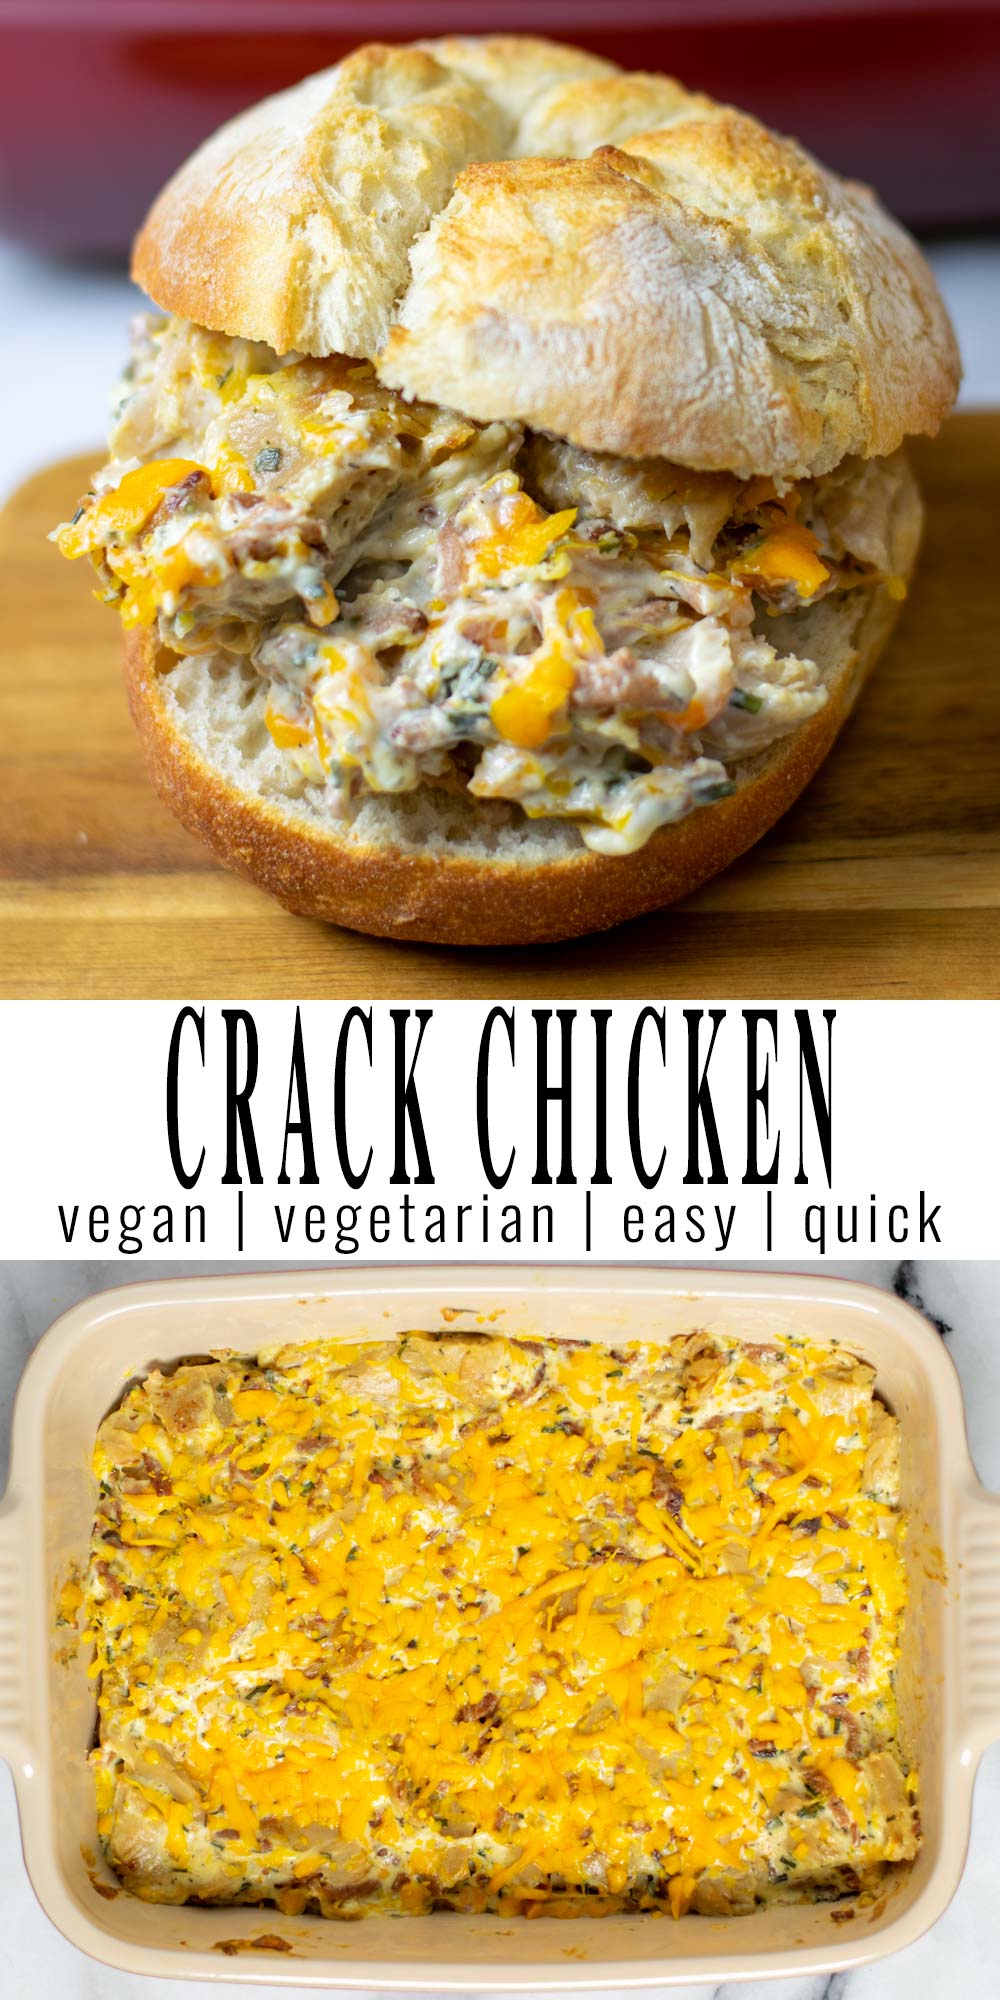 Collage of two pictures of the Crack Chicken with recipe title text.